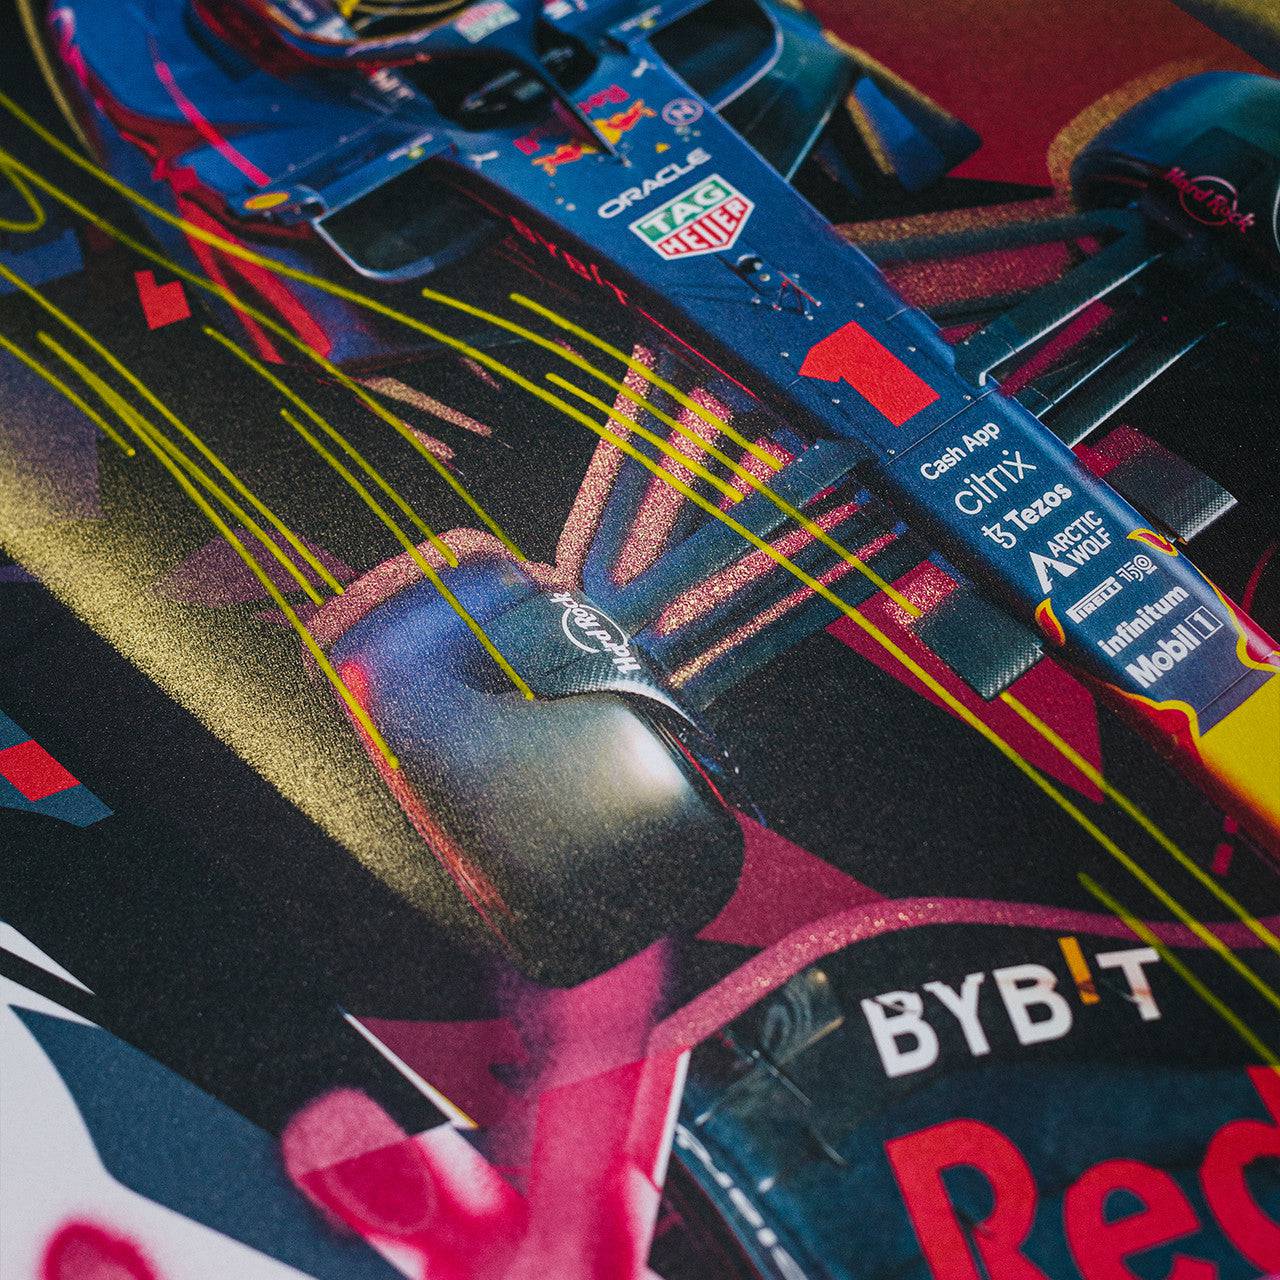 Oracle Red Bull Racing - Max Verstappen - Art to the Max - 2022 | Art Edition | #16/25